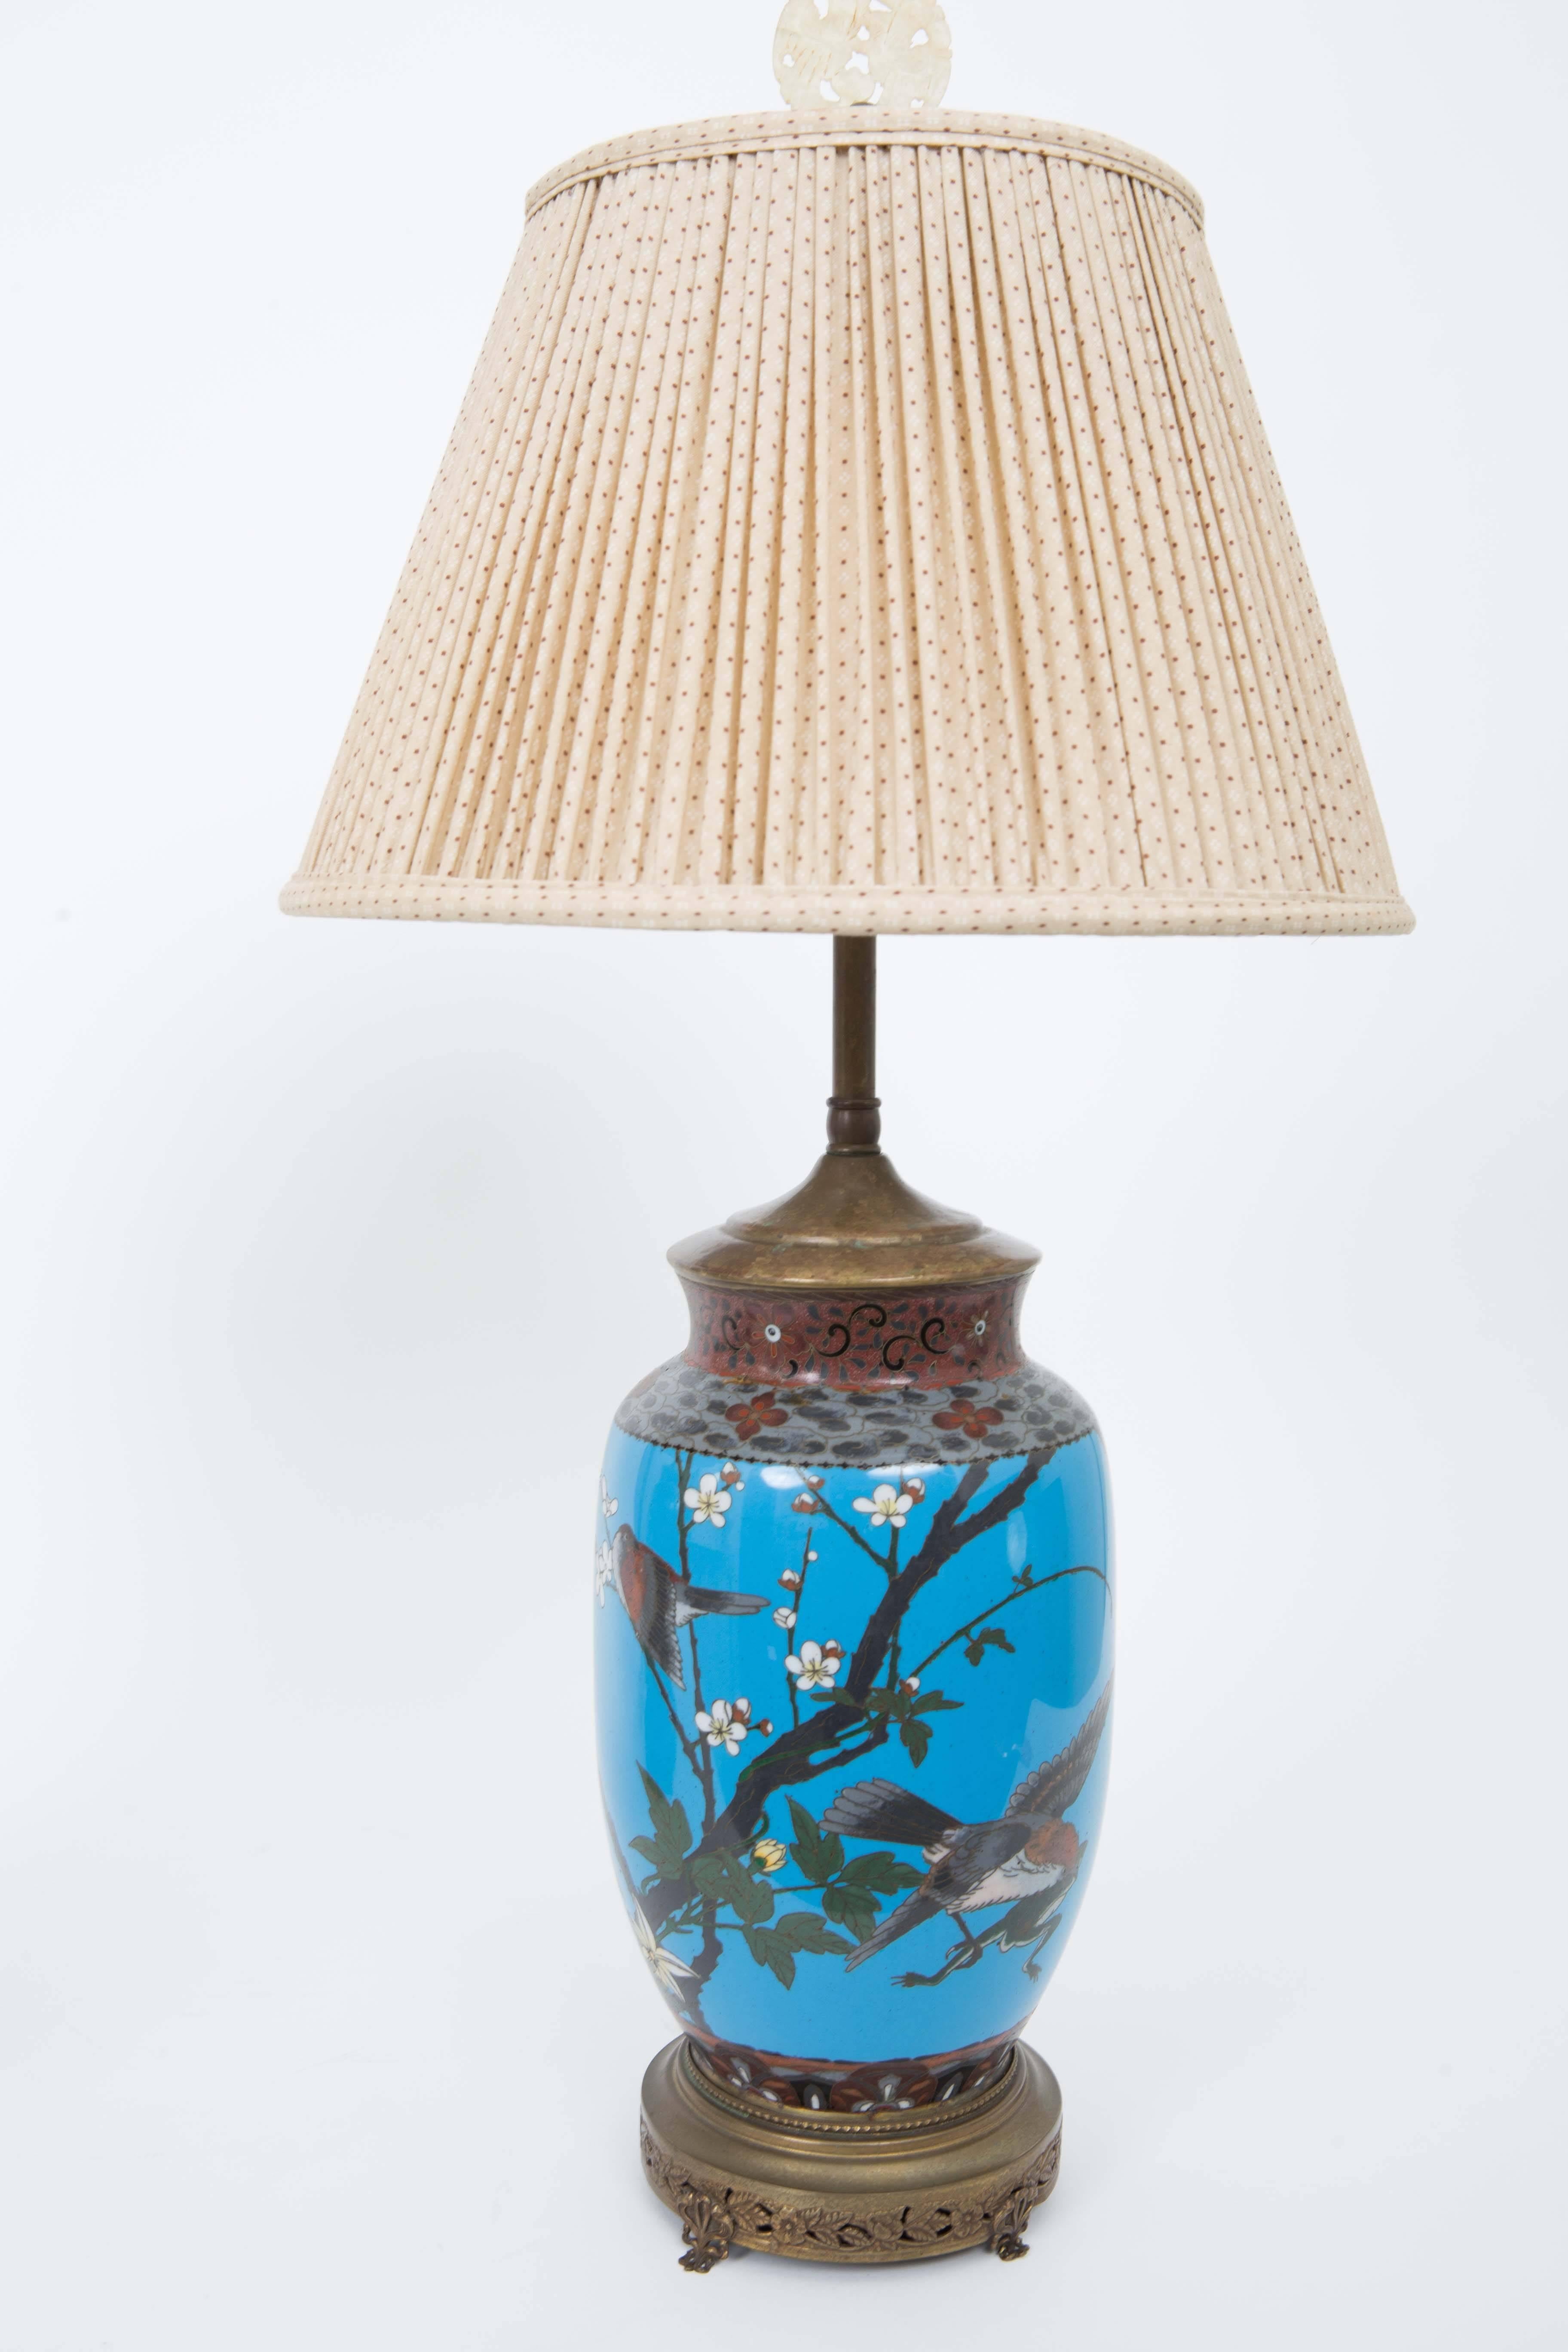 Enamel Pair of Early 20th Century Japanese Cloisonne Table Lamps